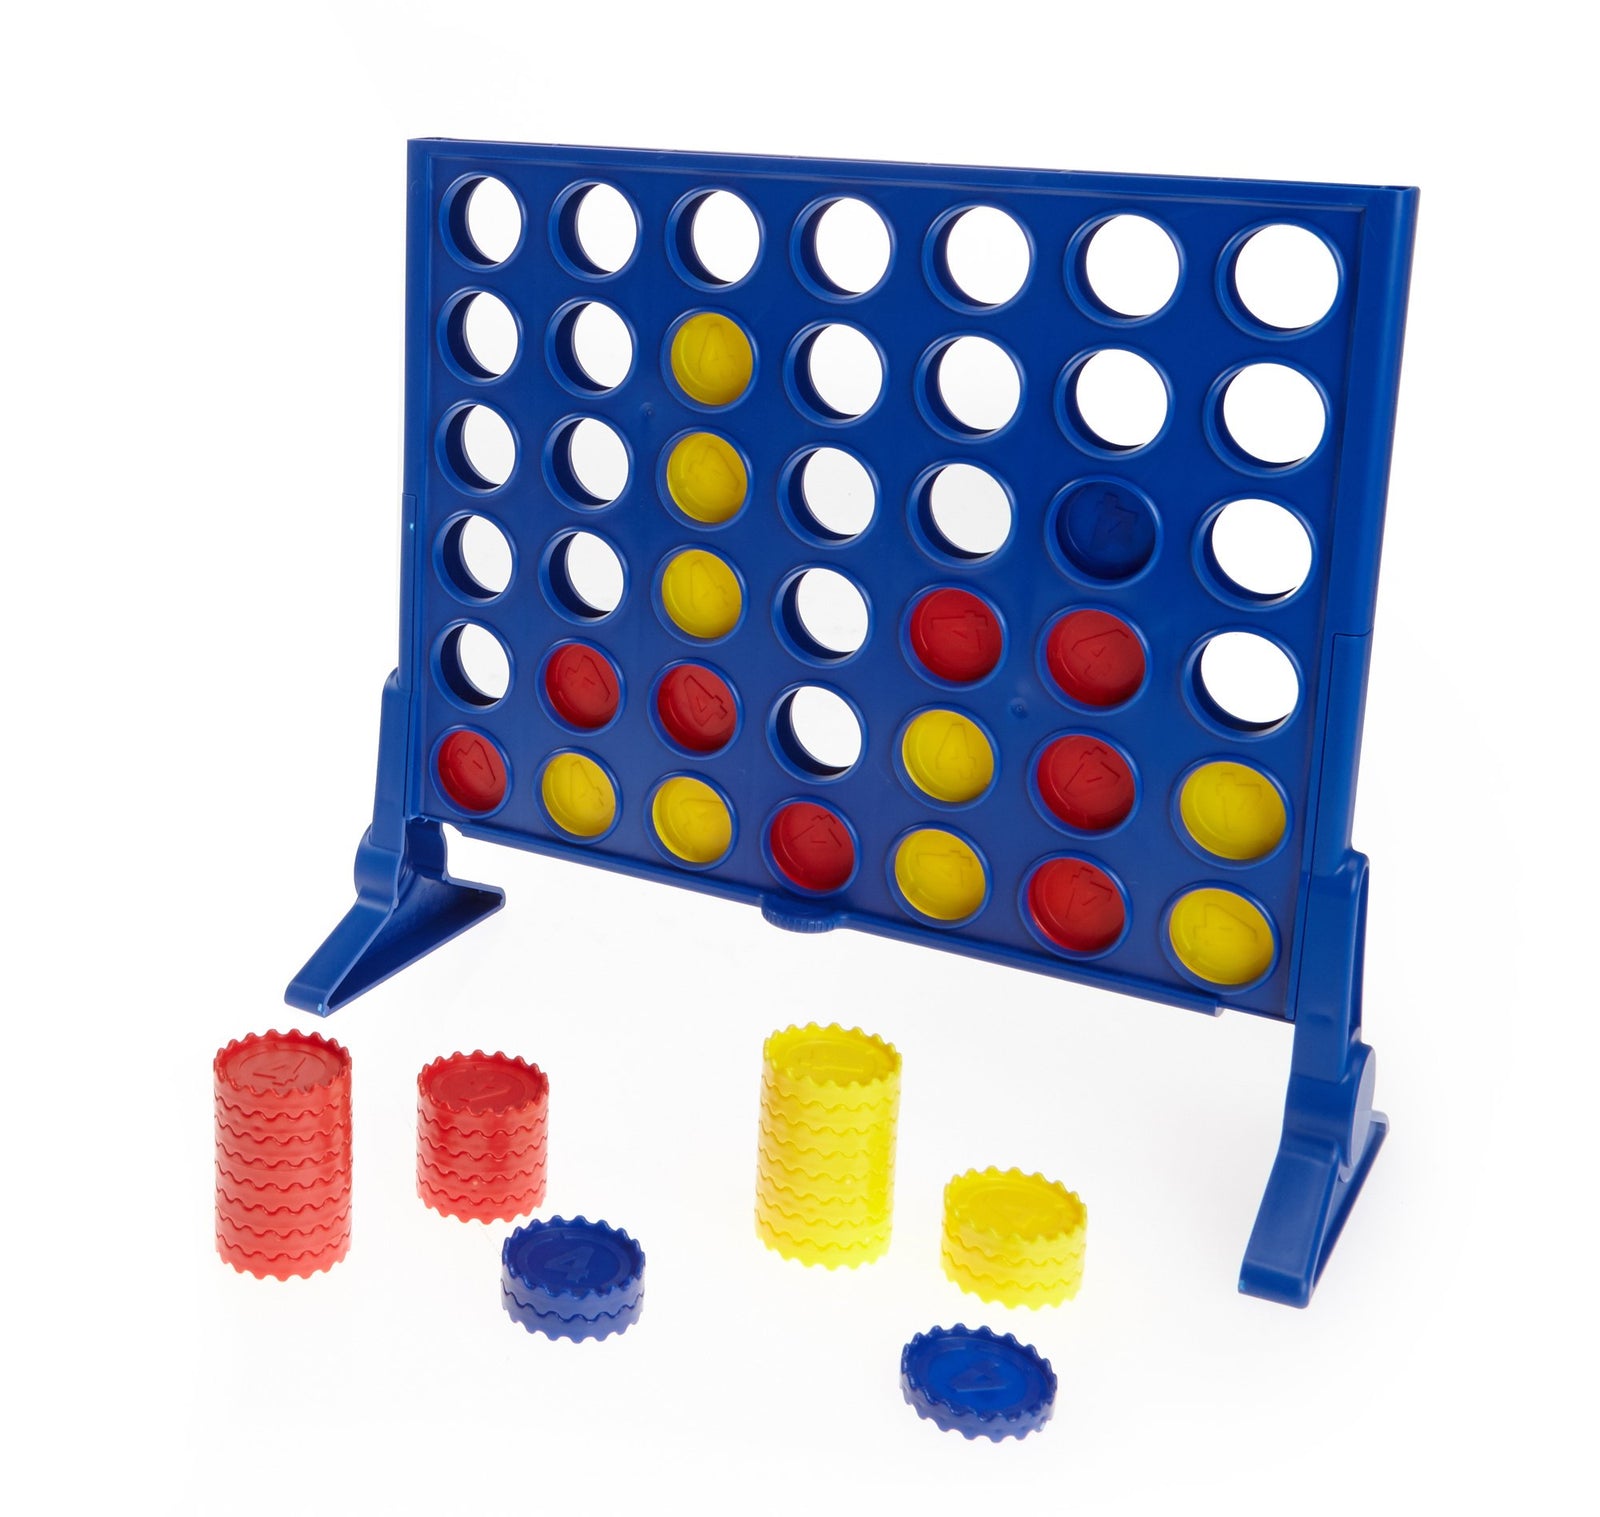 Connect 4 Strategy Board Game for Ages 6 and Up (Amazon Exclusive)